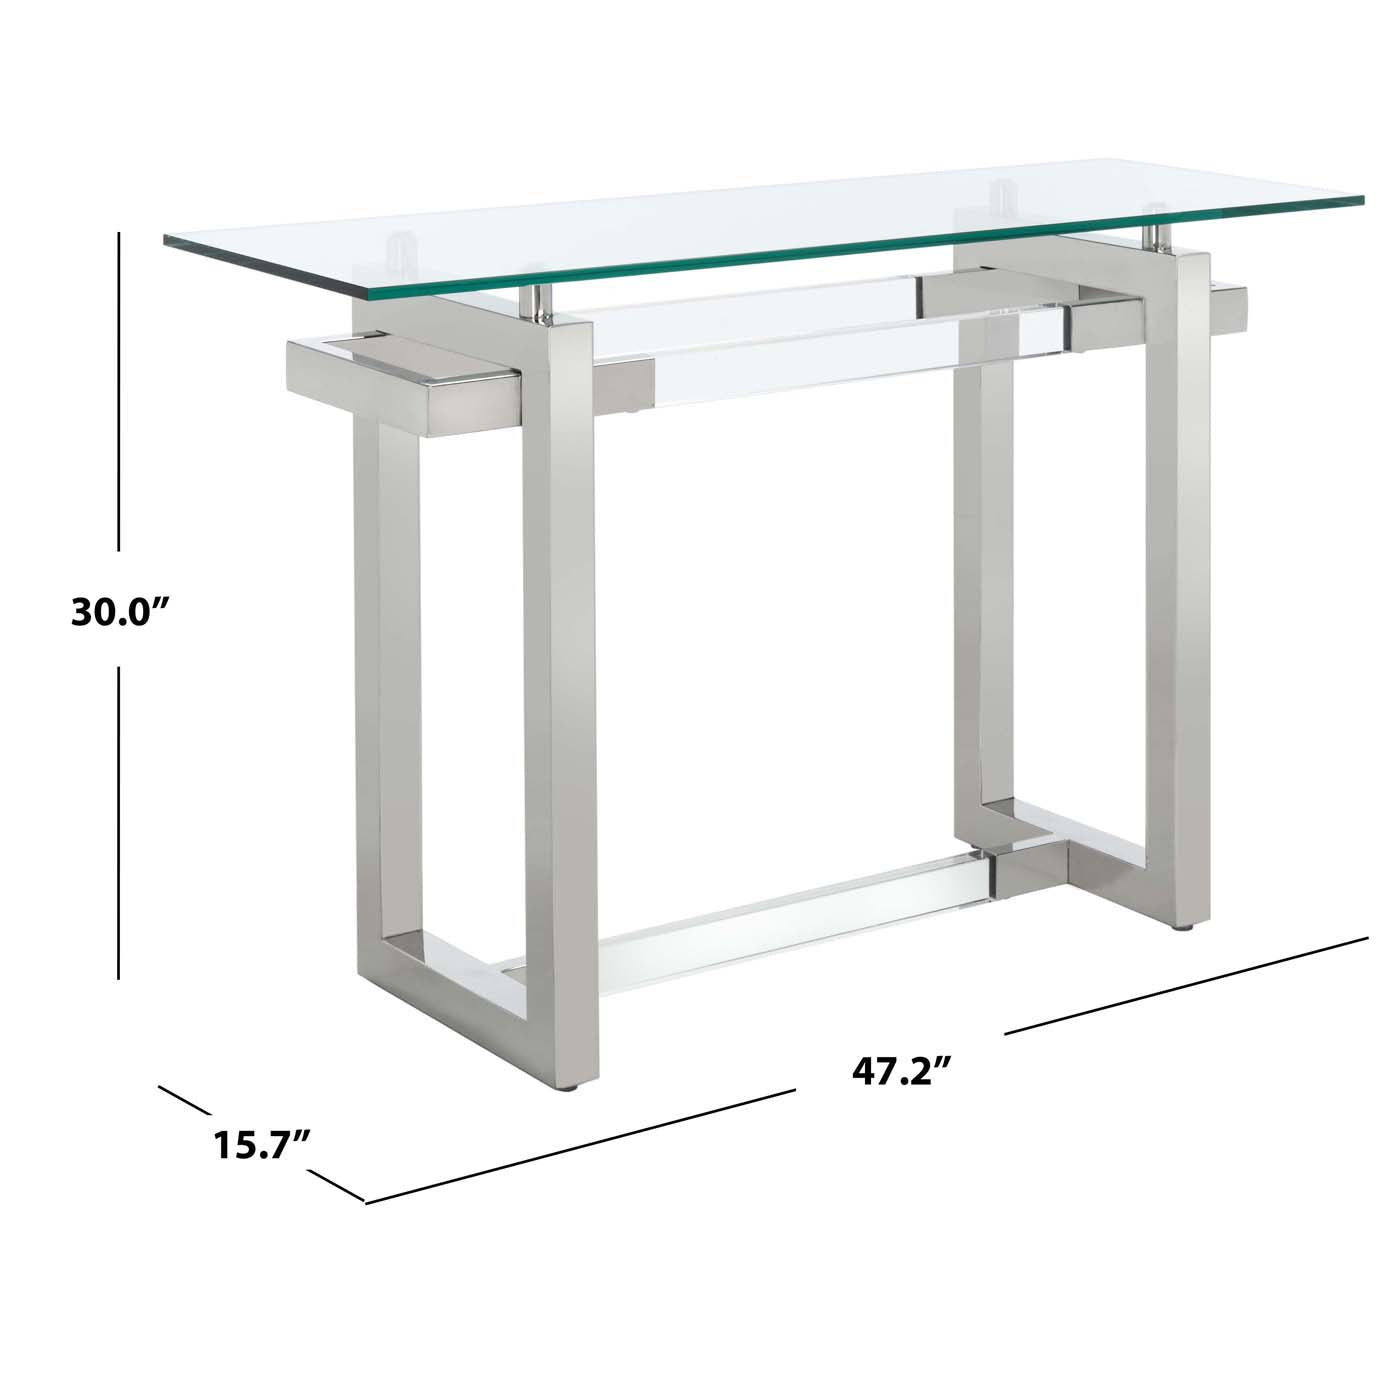 Safavieh Couture Montrelle Acrylic Console Table